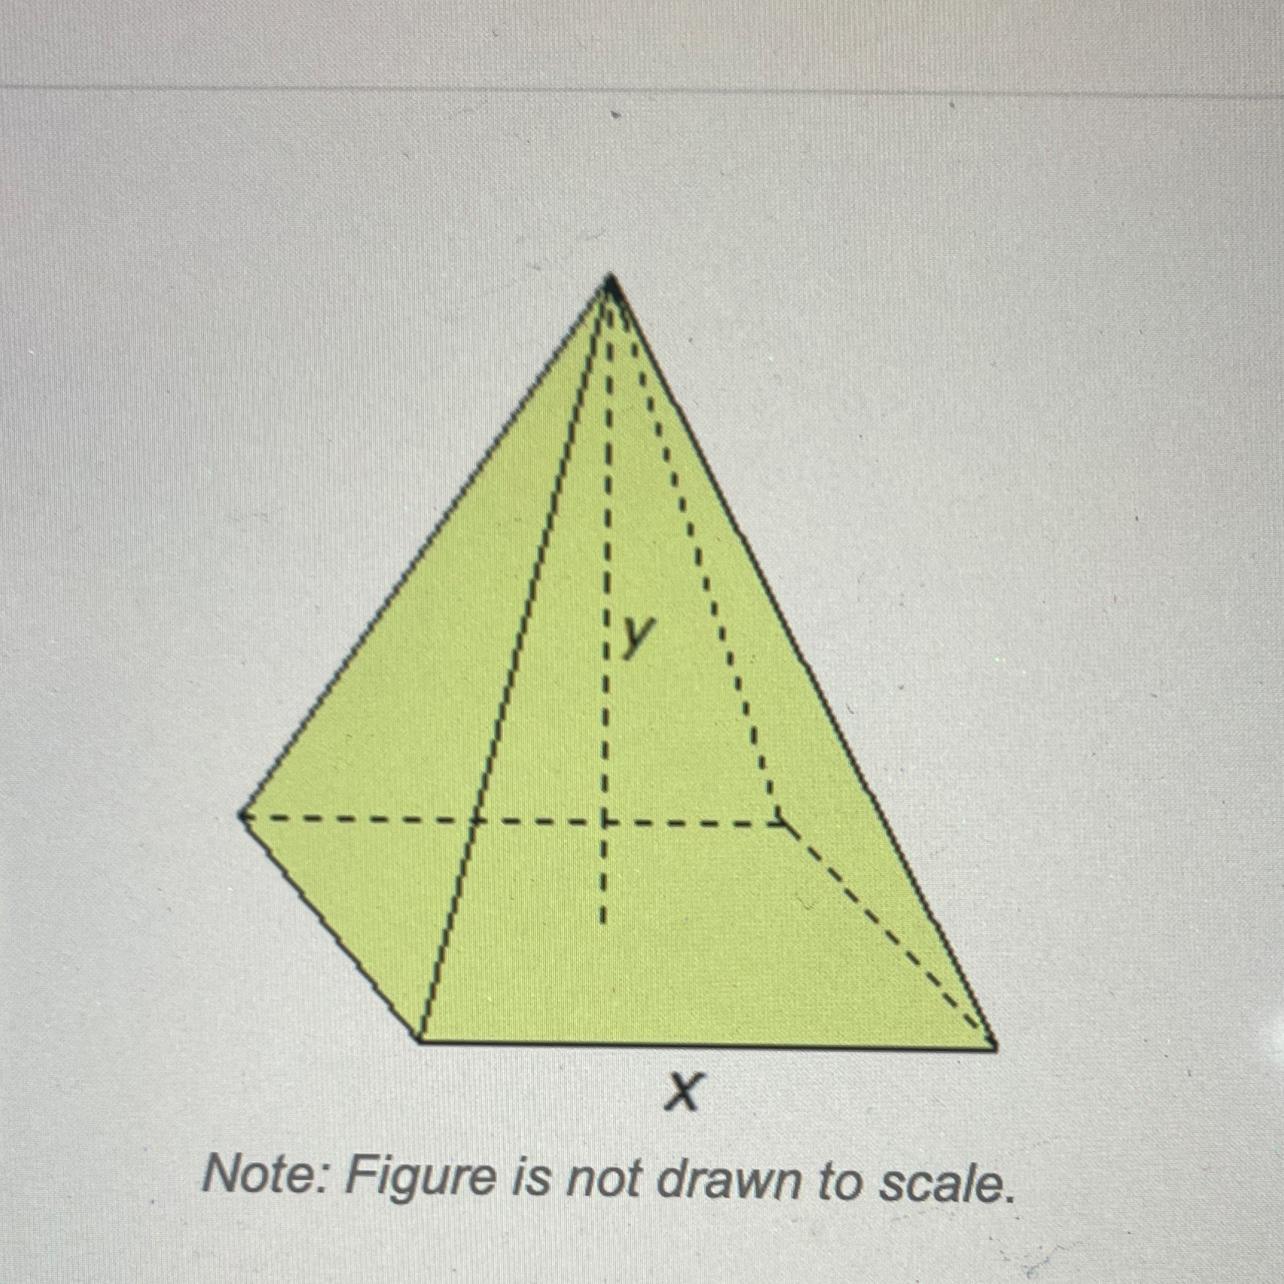 If X = 8 Units And Y = 24 Units, Then What Is The Volume Of The Square Pyramid Shown Above?